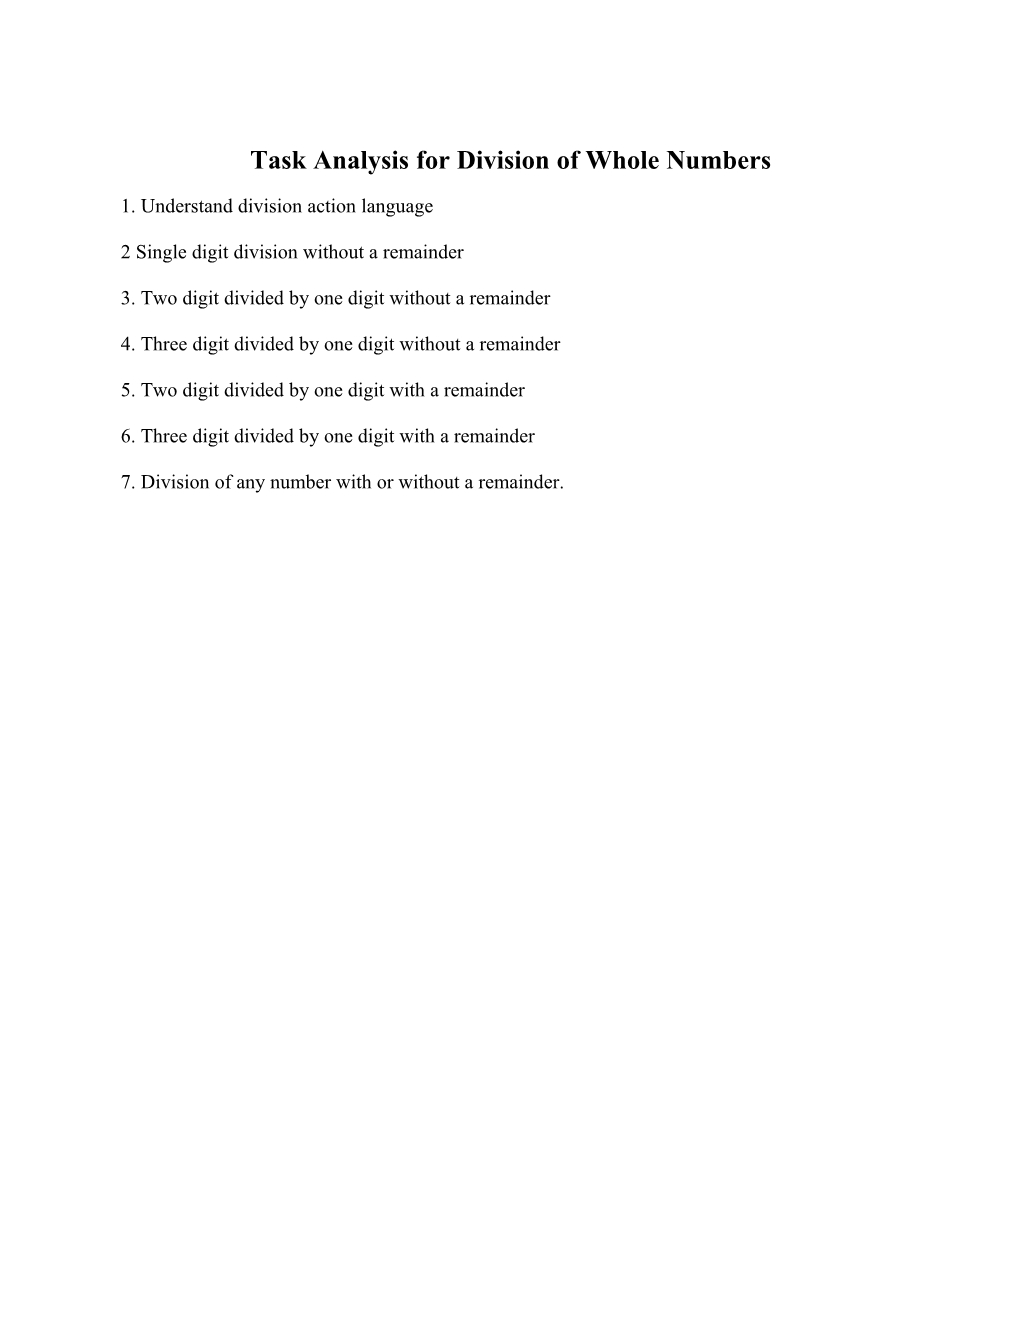 Task Analysis for Division of Whole Numbers